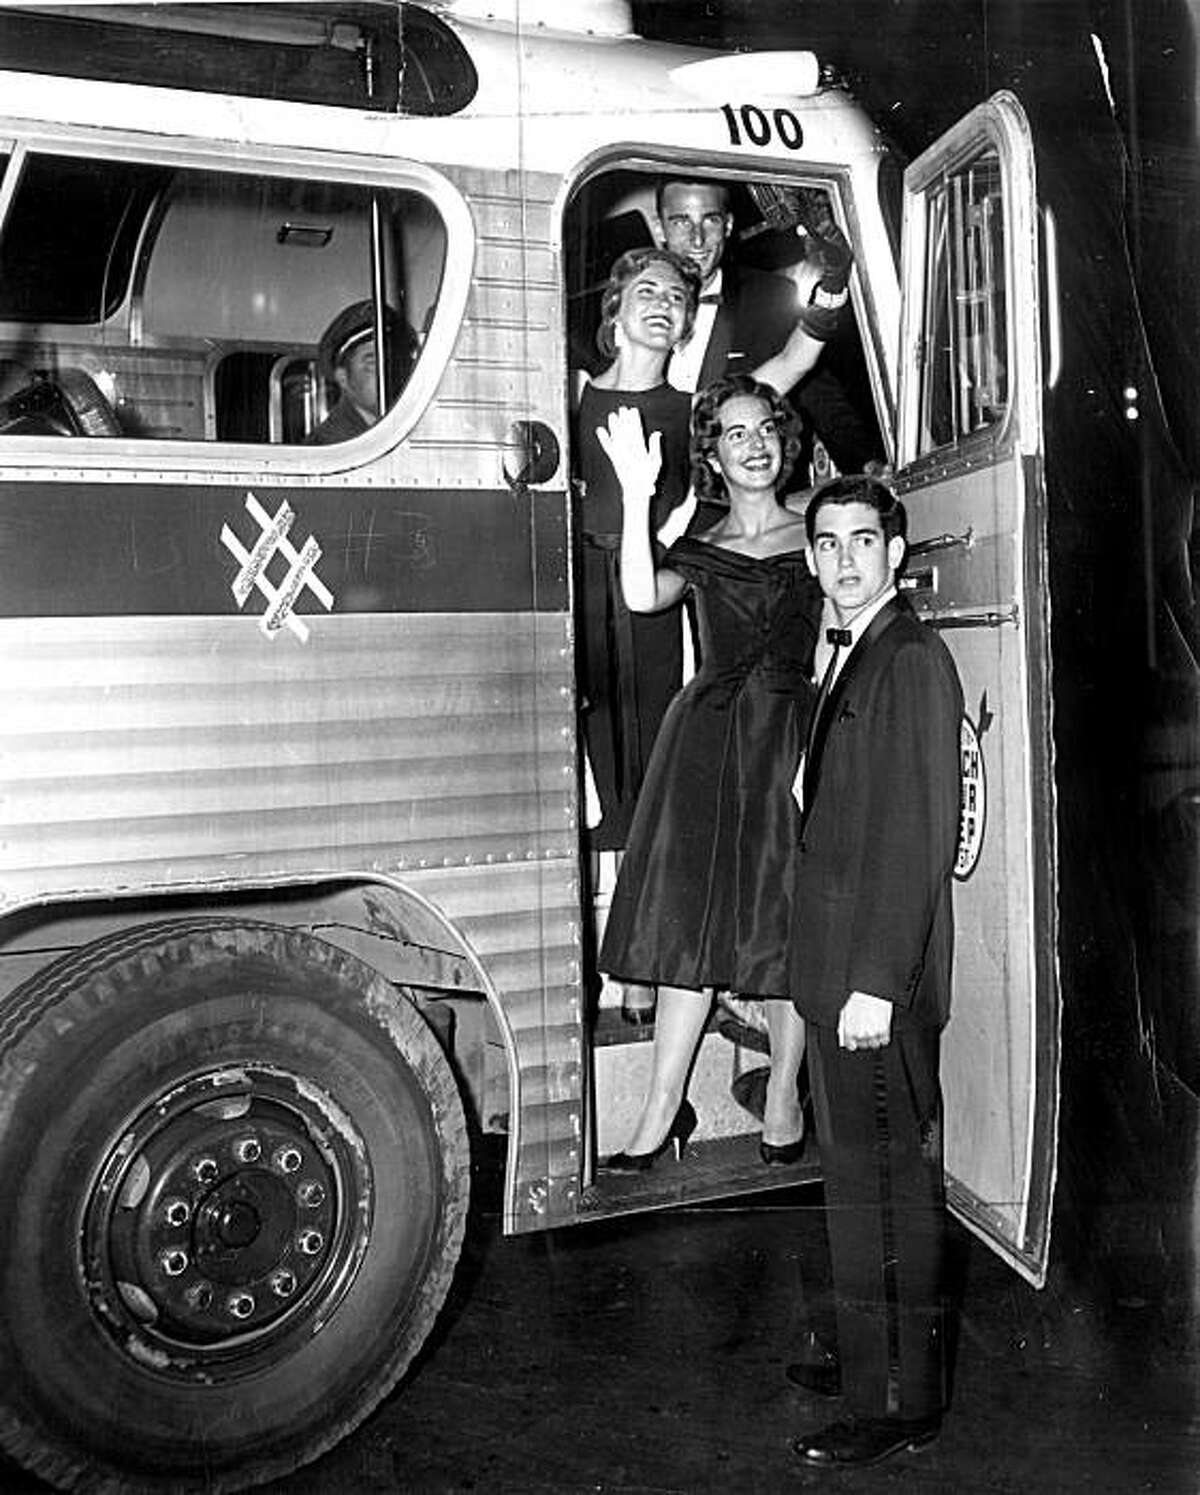 From top: Dennis Bond, Linda Schmidt, Cathy Cartan and Mike Novelli, boarding a bus at the Black and White Ball, 1959.